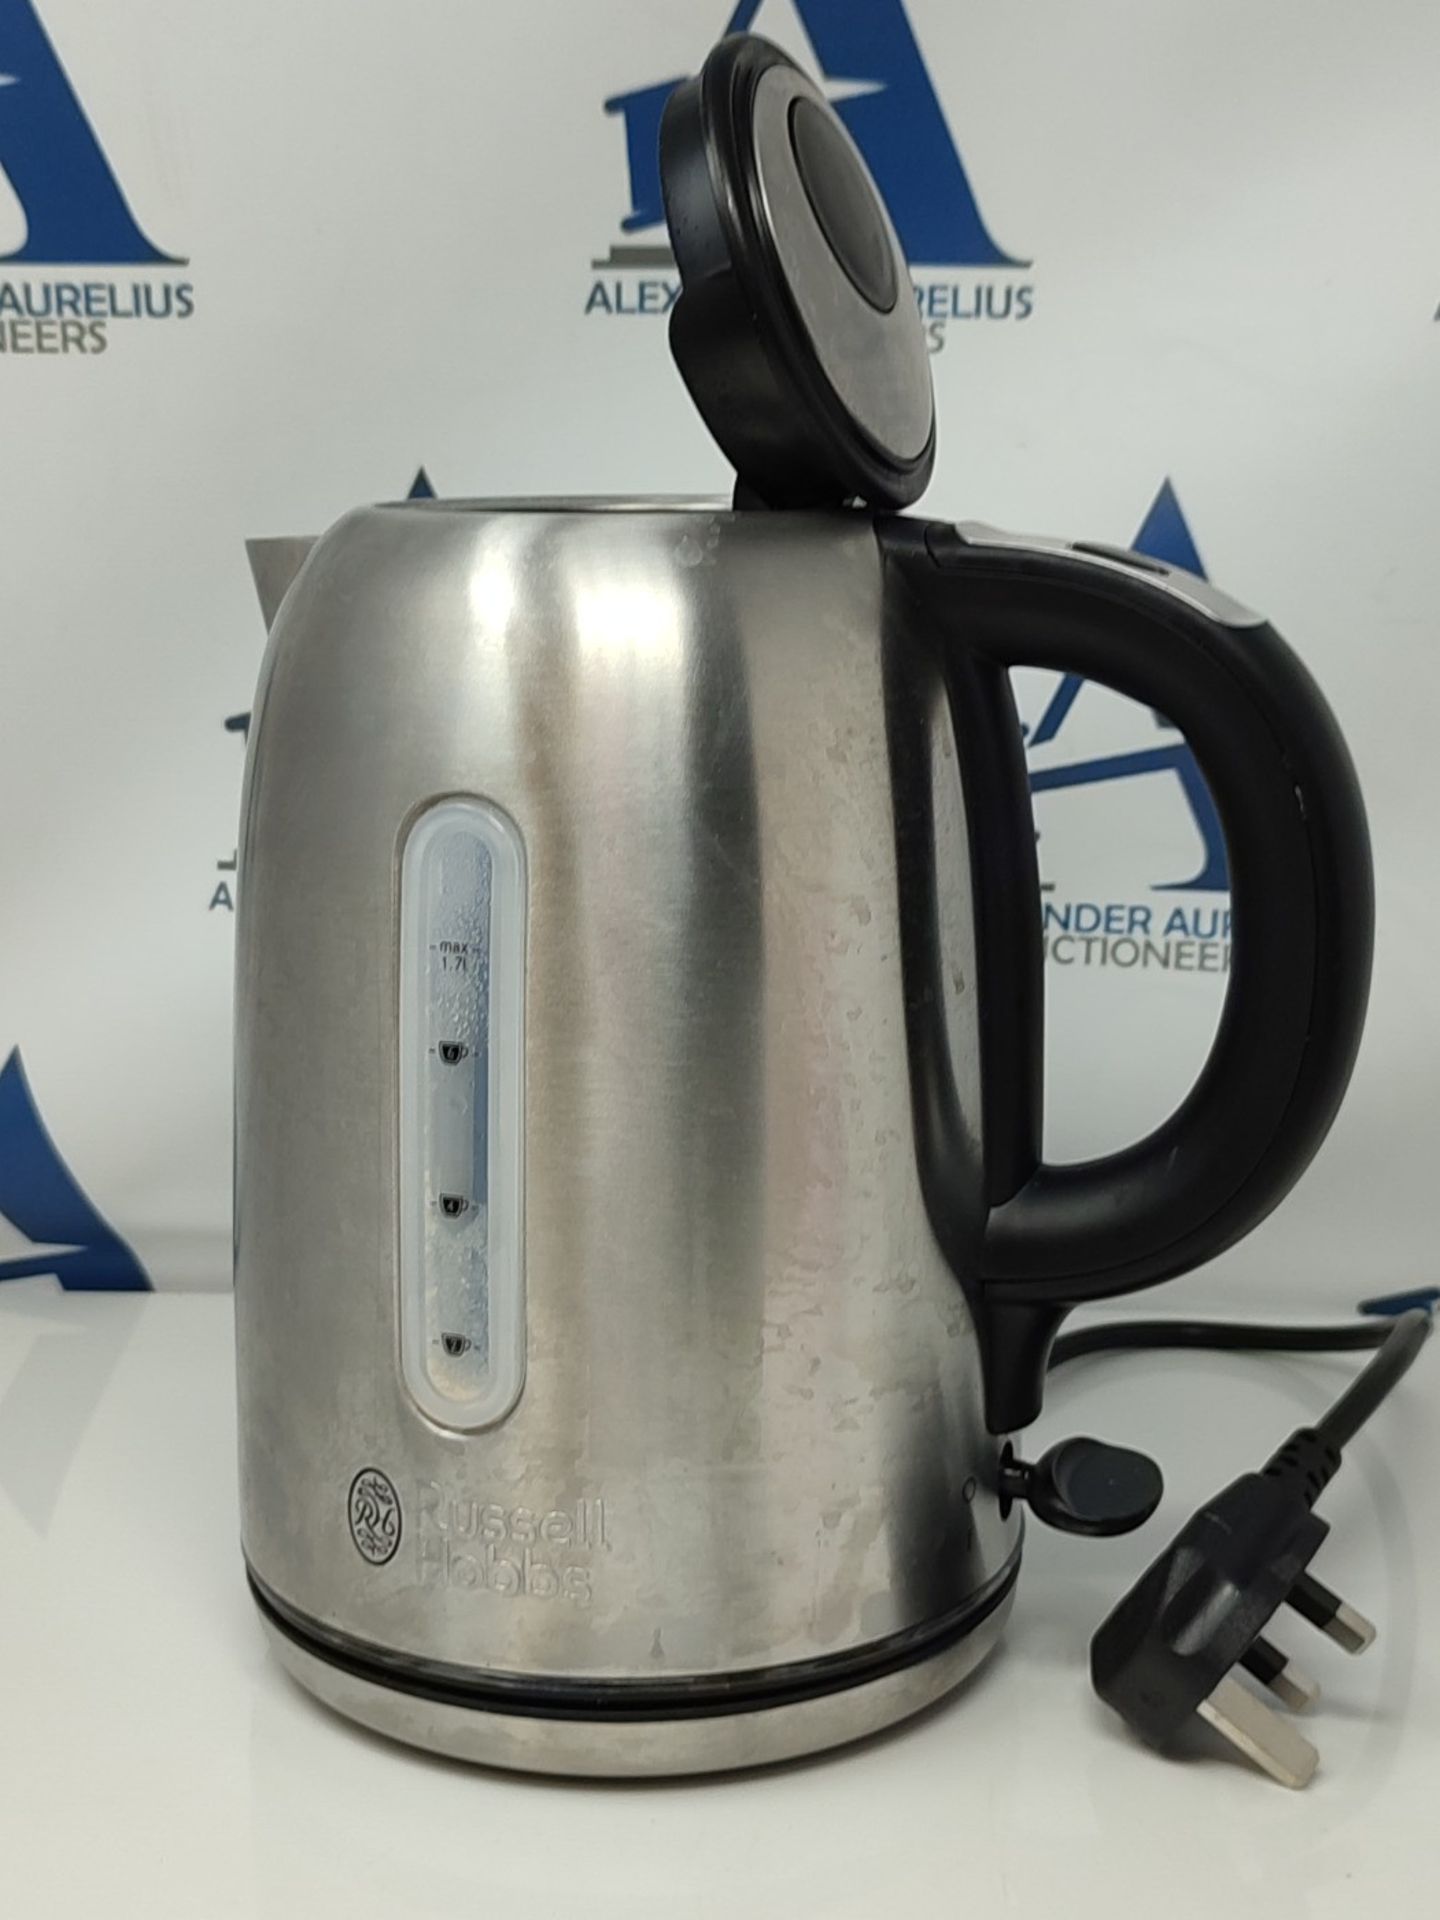 Russell Hobbs 20460 Quiet Boil Kettle, Brushed Stainless Steel, 3000W, 1.7 Litres - Image 2 of 2